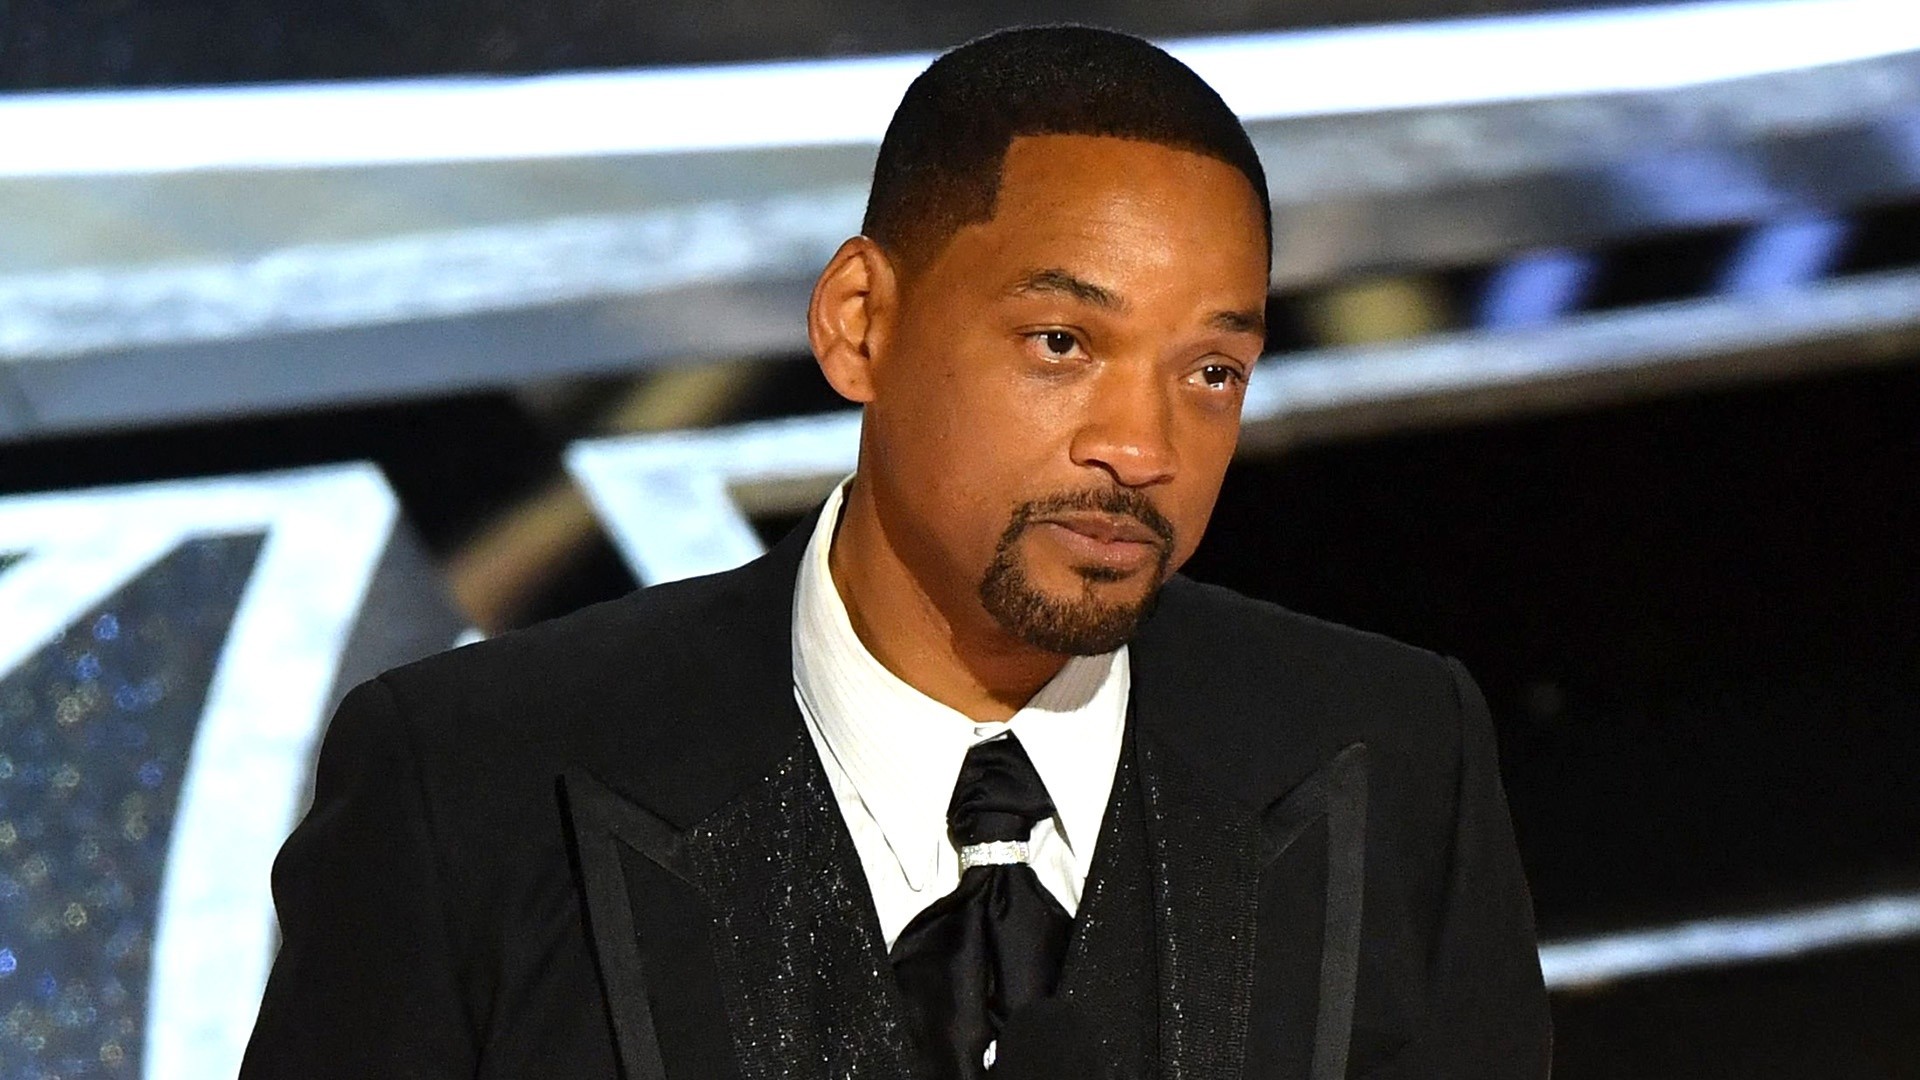 Will Smith Resigns From Academy Over Chris Rock Slap at Oscars